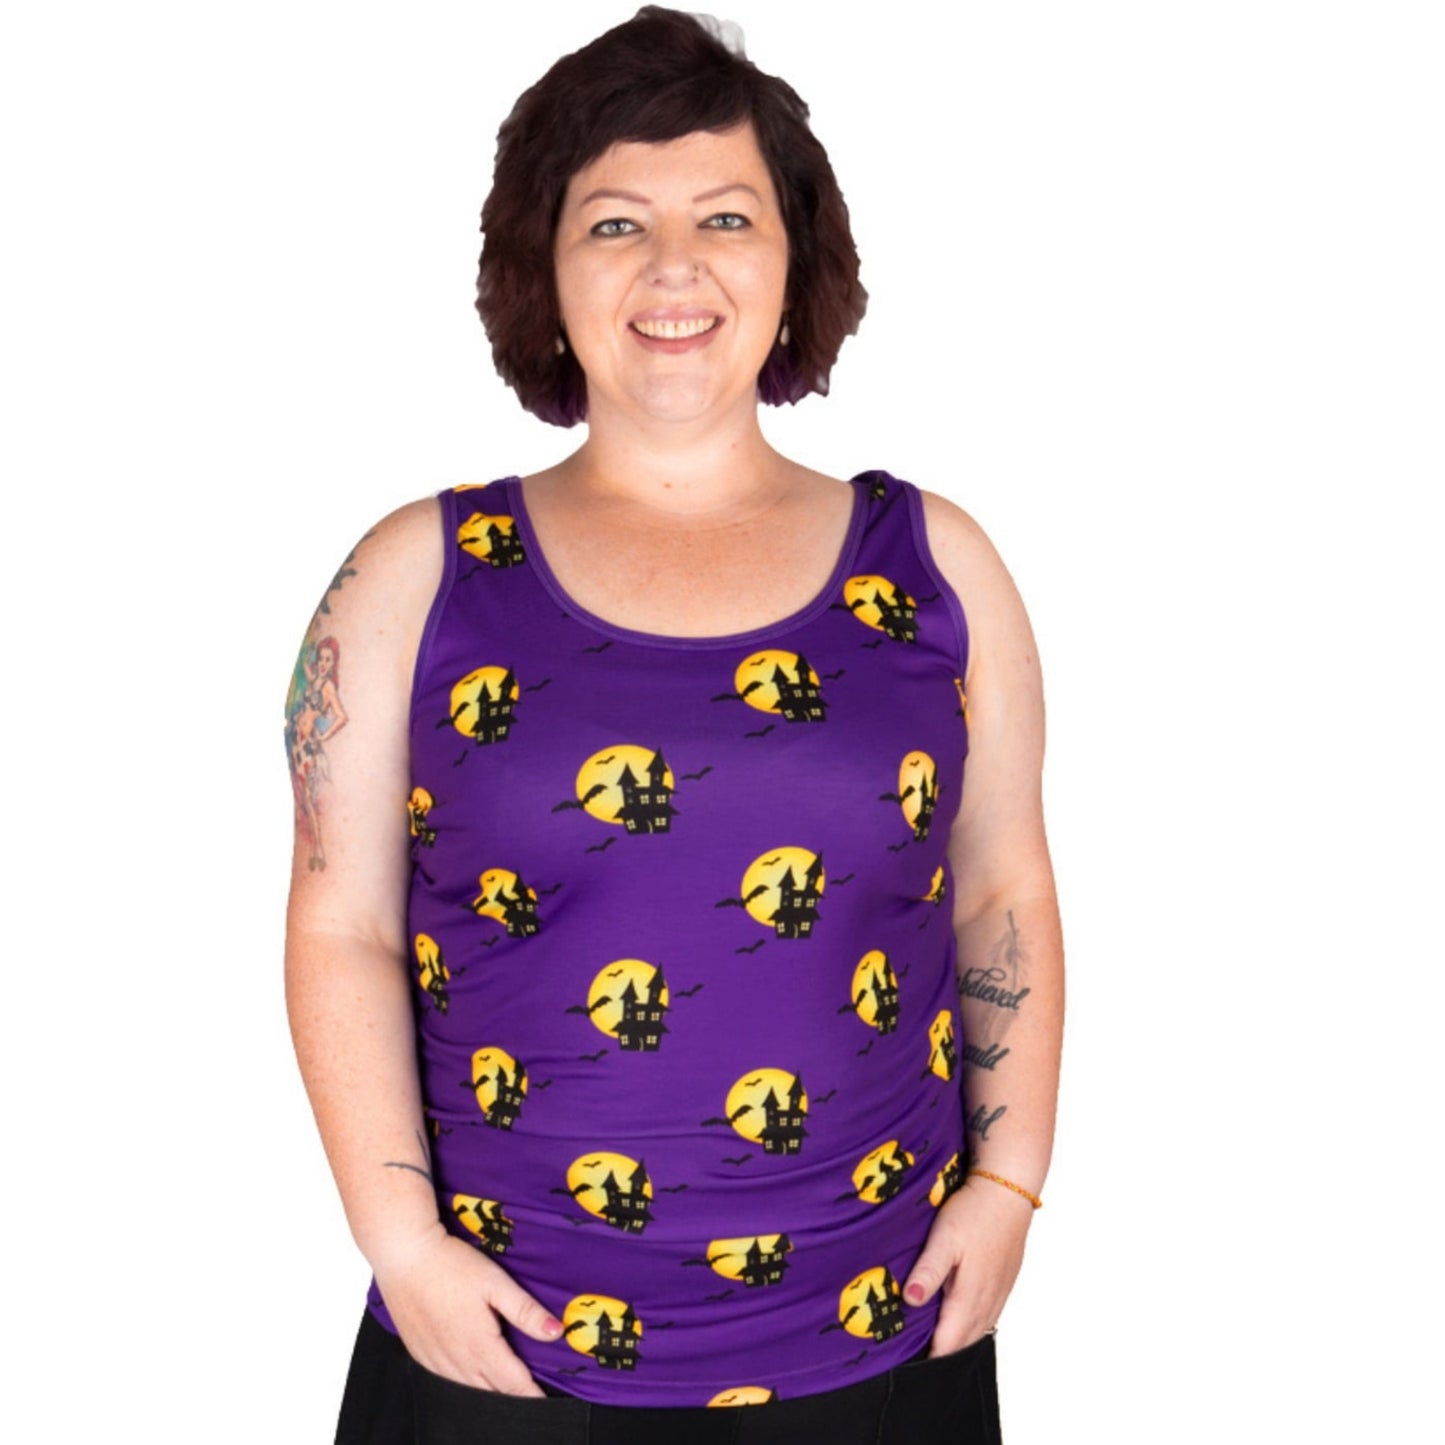 Haunted House Singlet Top by RainbowsAndFairies.com.au (Addams Family - Munsters - Haunted - Vintage Inspired - Kitsch - Bats - Tank Top - Purple) - SKU: CL_SGLET_HAUNT_ORG - Pic-03